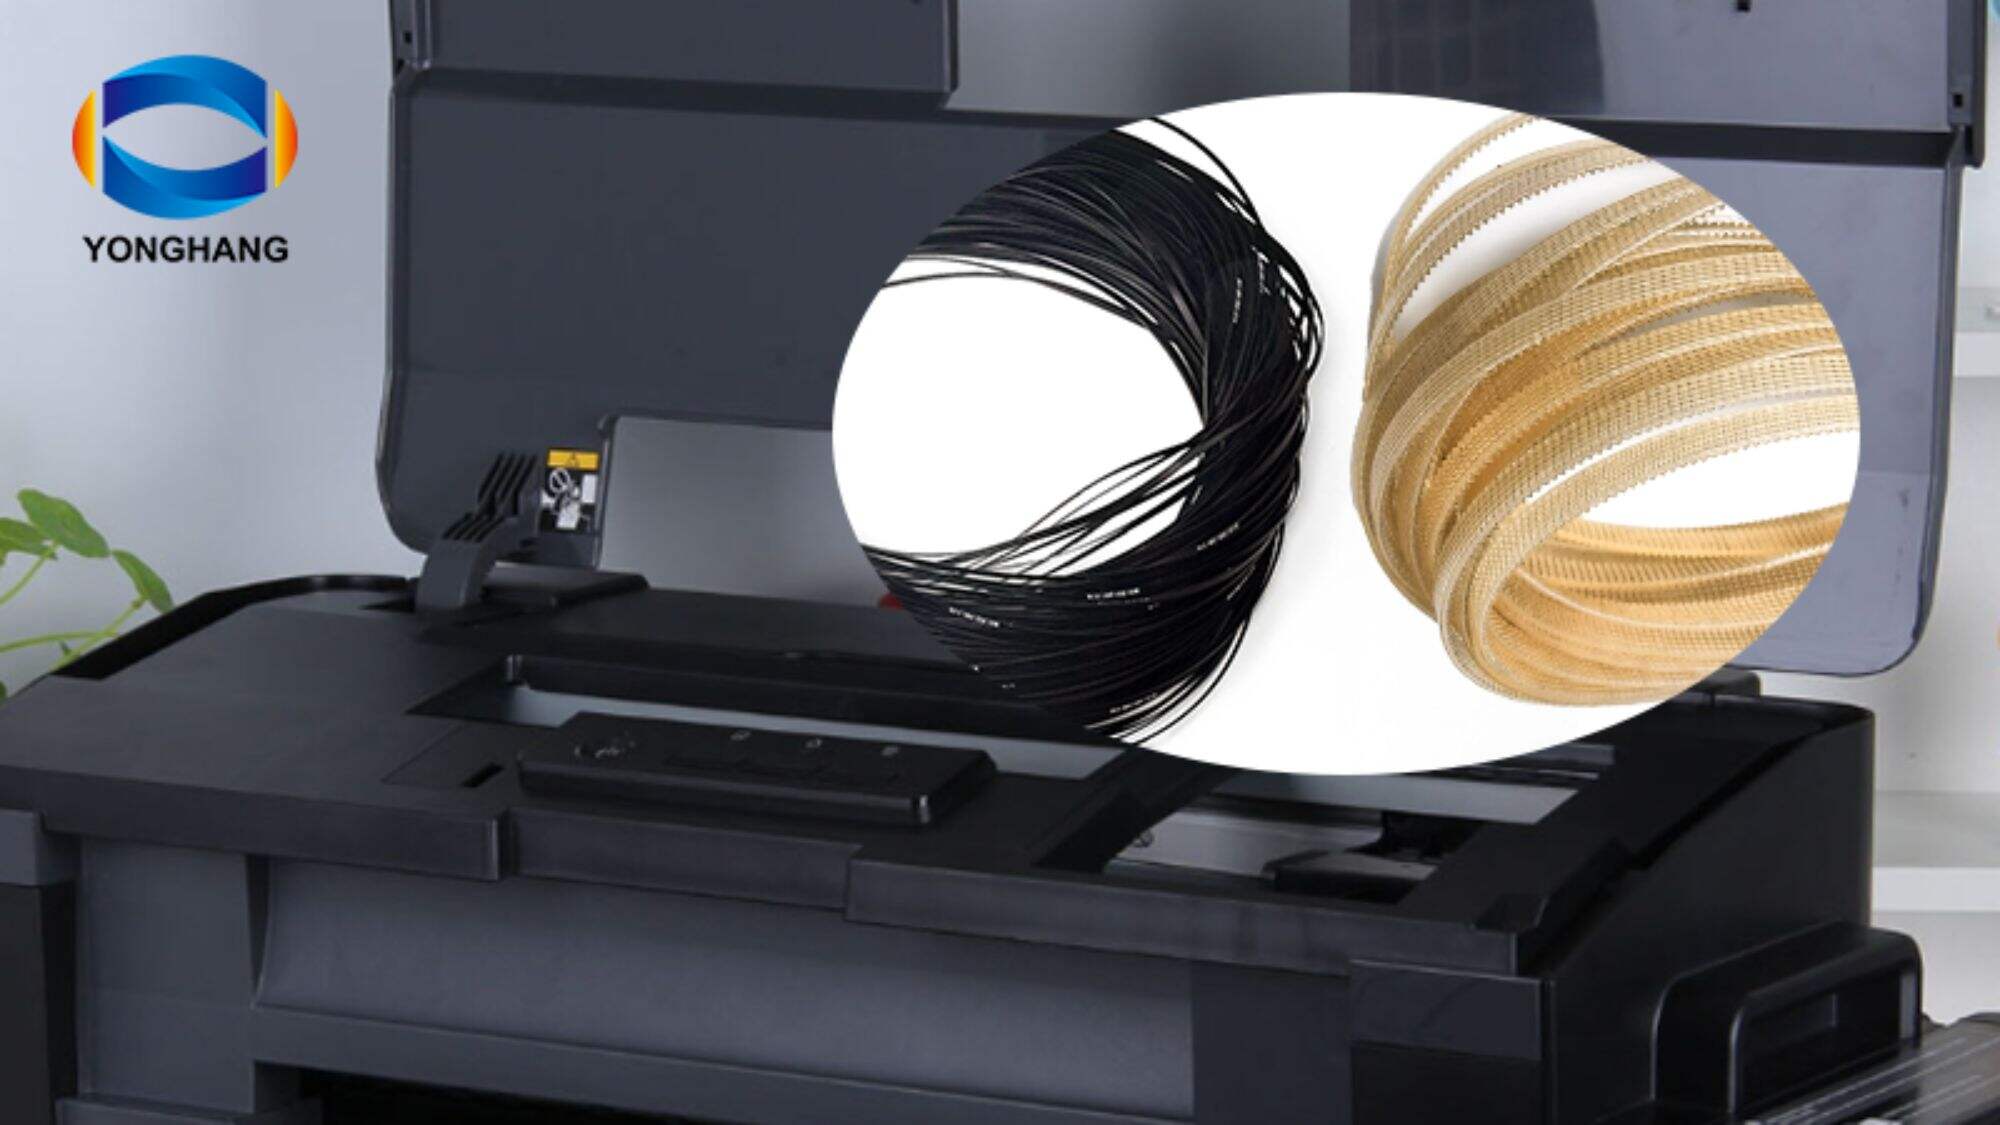 Do you know what the main material of EPSON printer belt is?